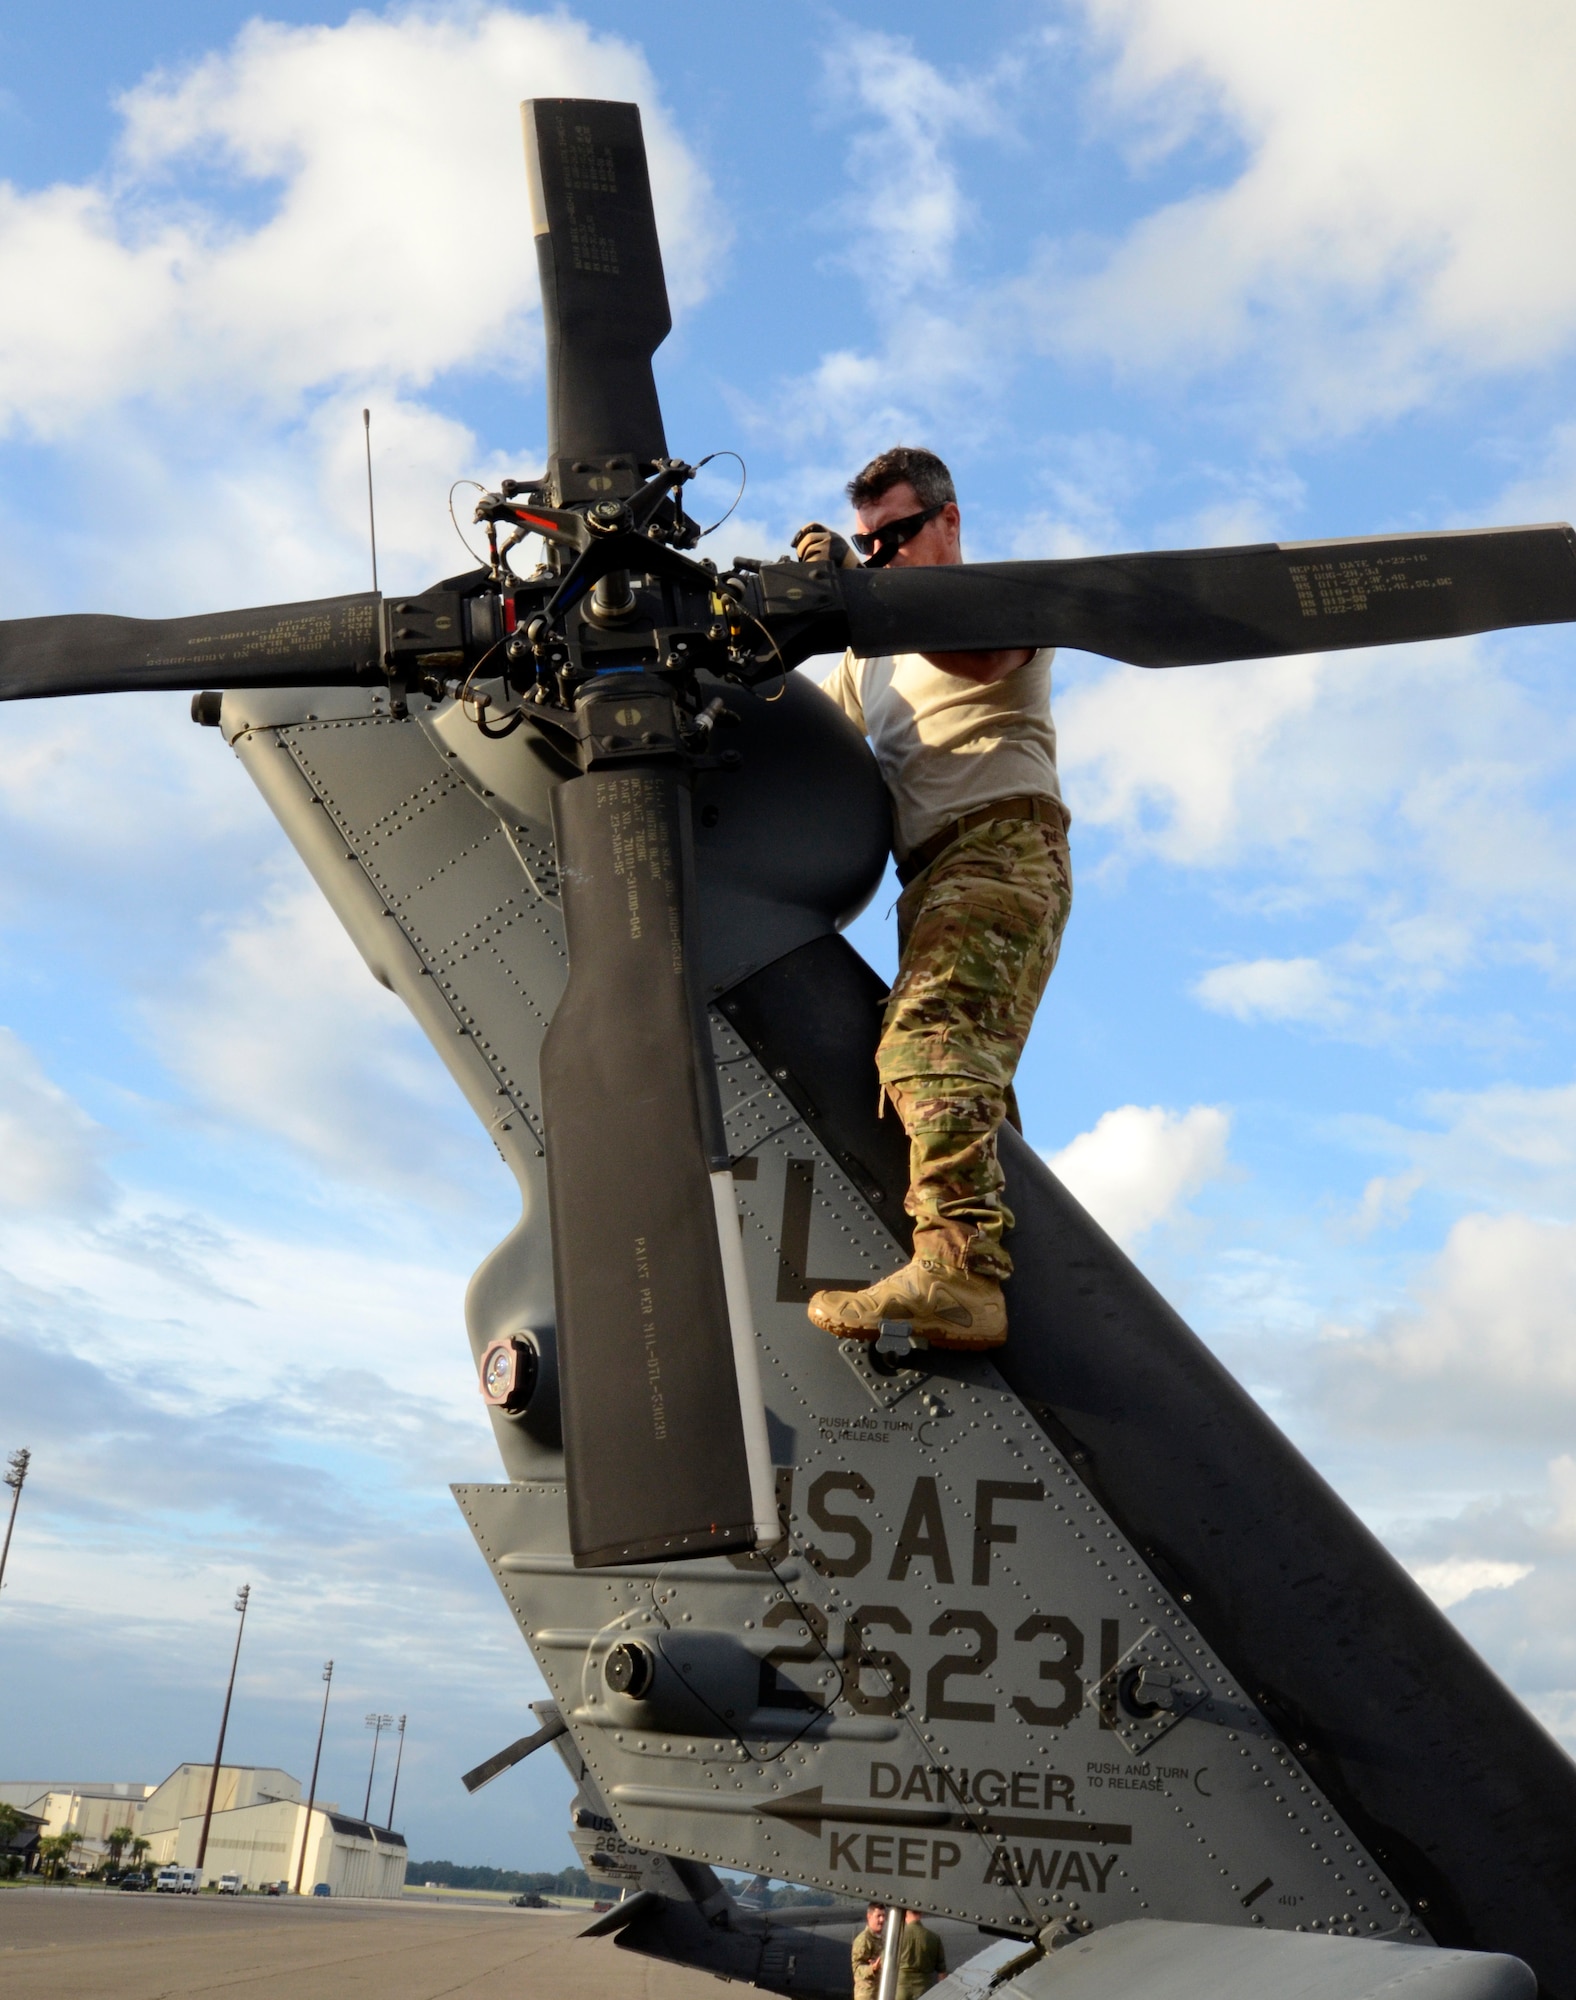 Senior Master Sgt. Will Towers, 301st Special Missions Aviator, checks the tail rotor blades as part of his preflight checklist at Joint Base Charleston, S.C., Sept. 16, 2018. Towers is part of the 334th Air Expeditionary Group, a unit comprised of 920th Rescue Wing and 23d Wing assets and Airmen which stands ready to provide search-and-rescue relief in the wake of Hurricane Florence. (U.S. Air Force photo/Tech. Sgt. Kelly Goonan)